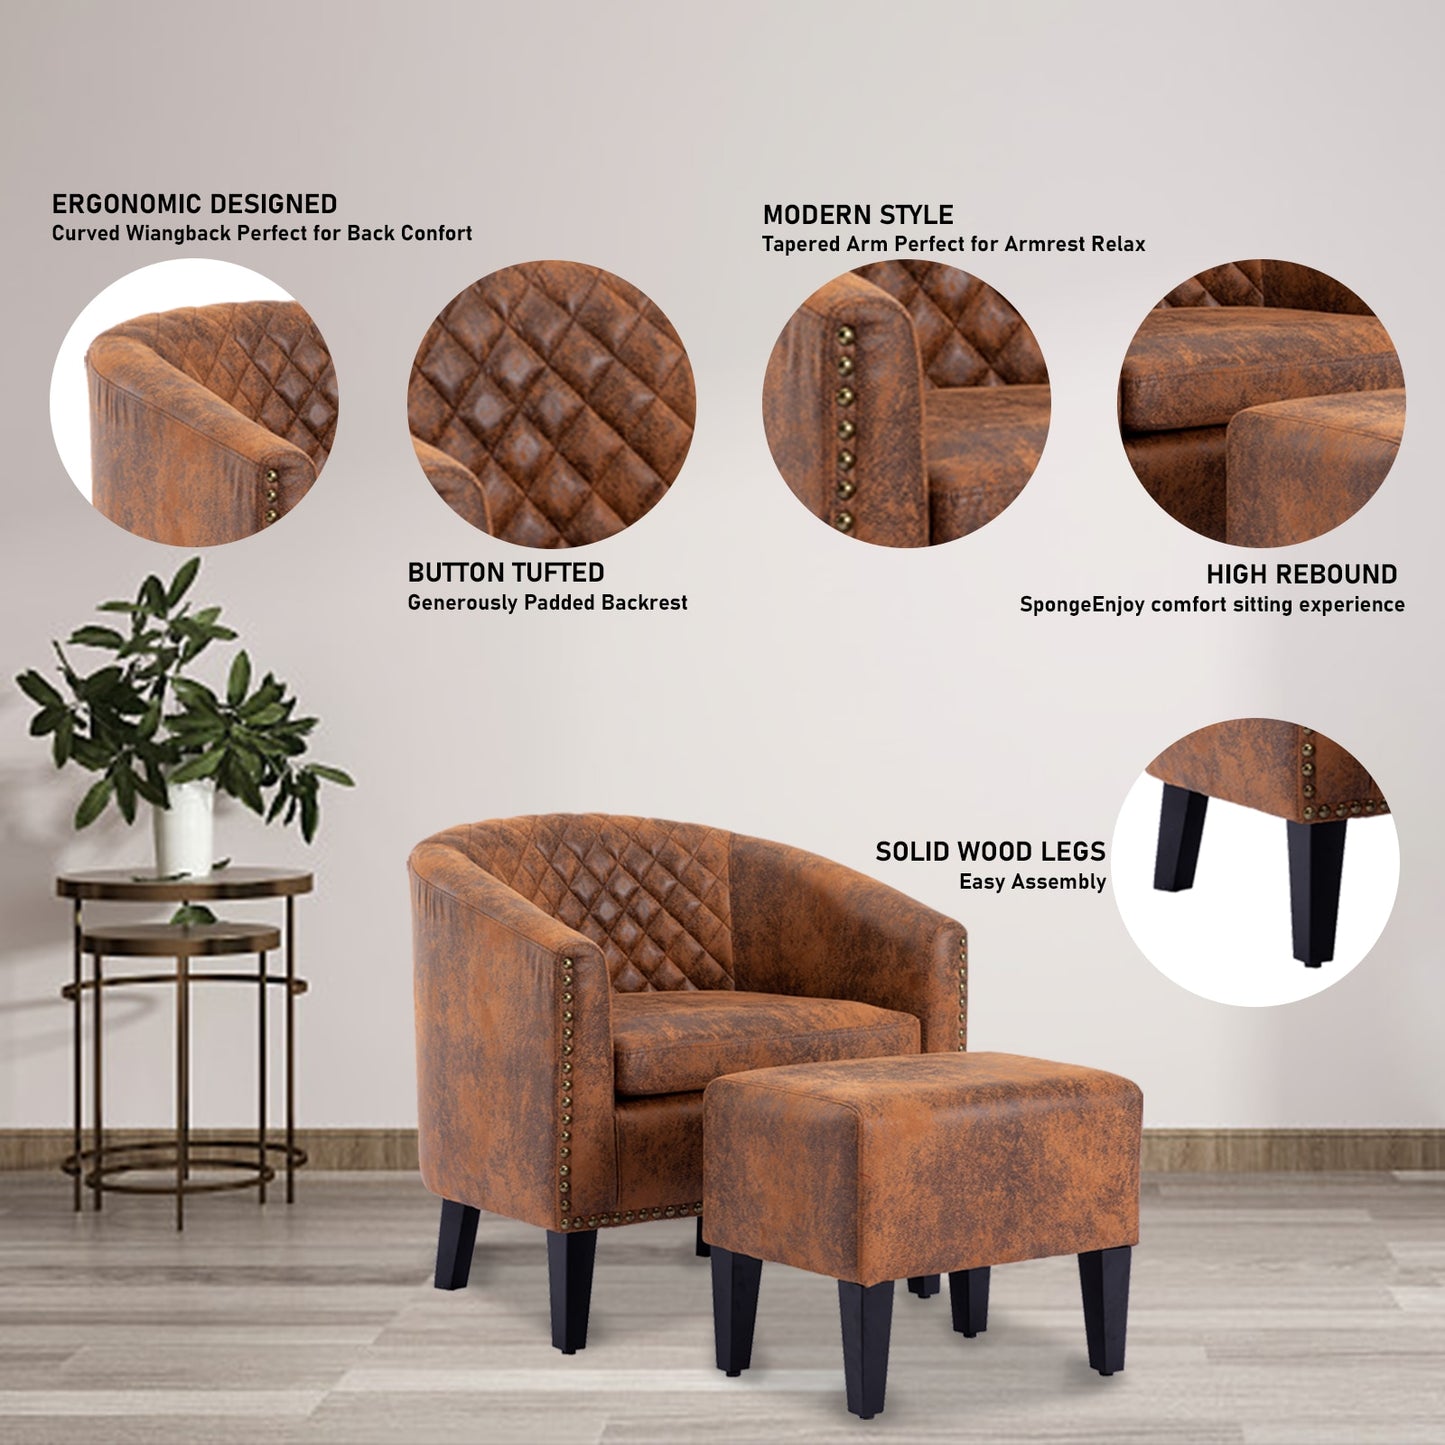 Modern Barrel Chair with Ottoman Foot Rest,PU Leather Round Chair Footrest Set for Office,Living Room,Bedroom,Reading Room